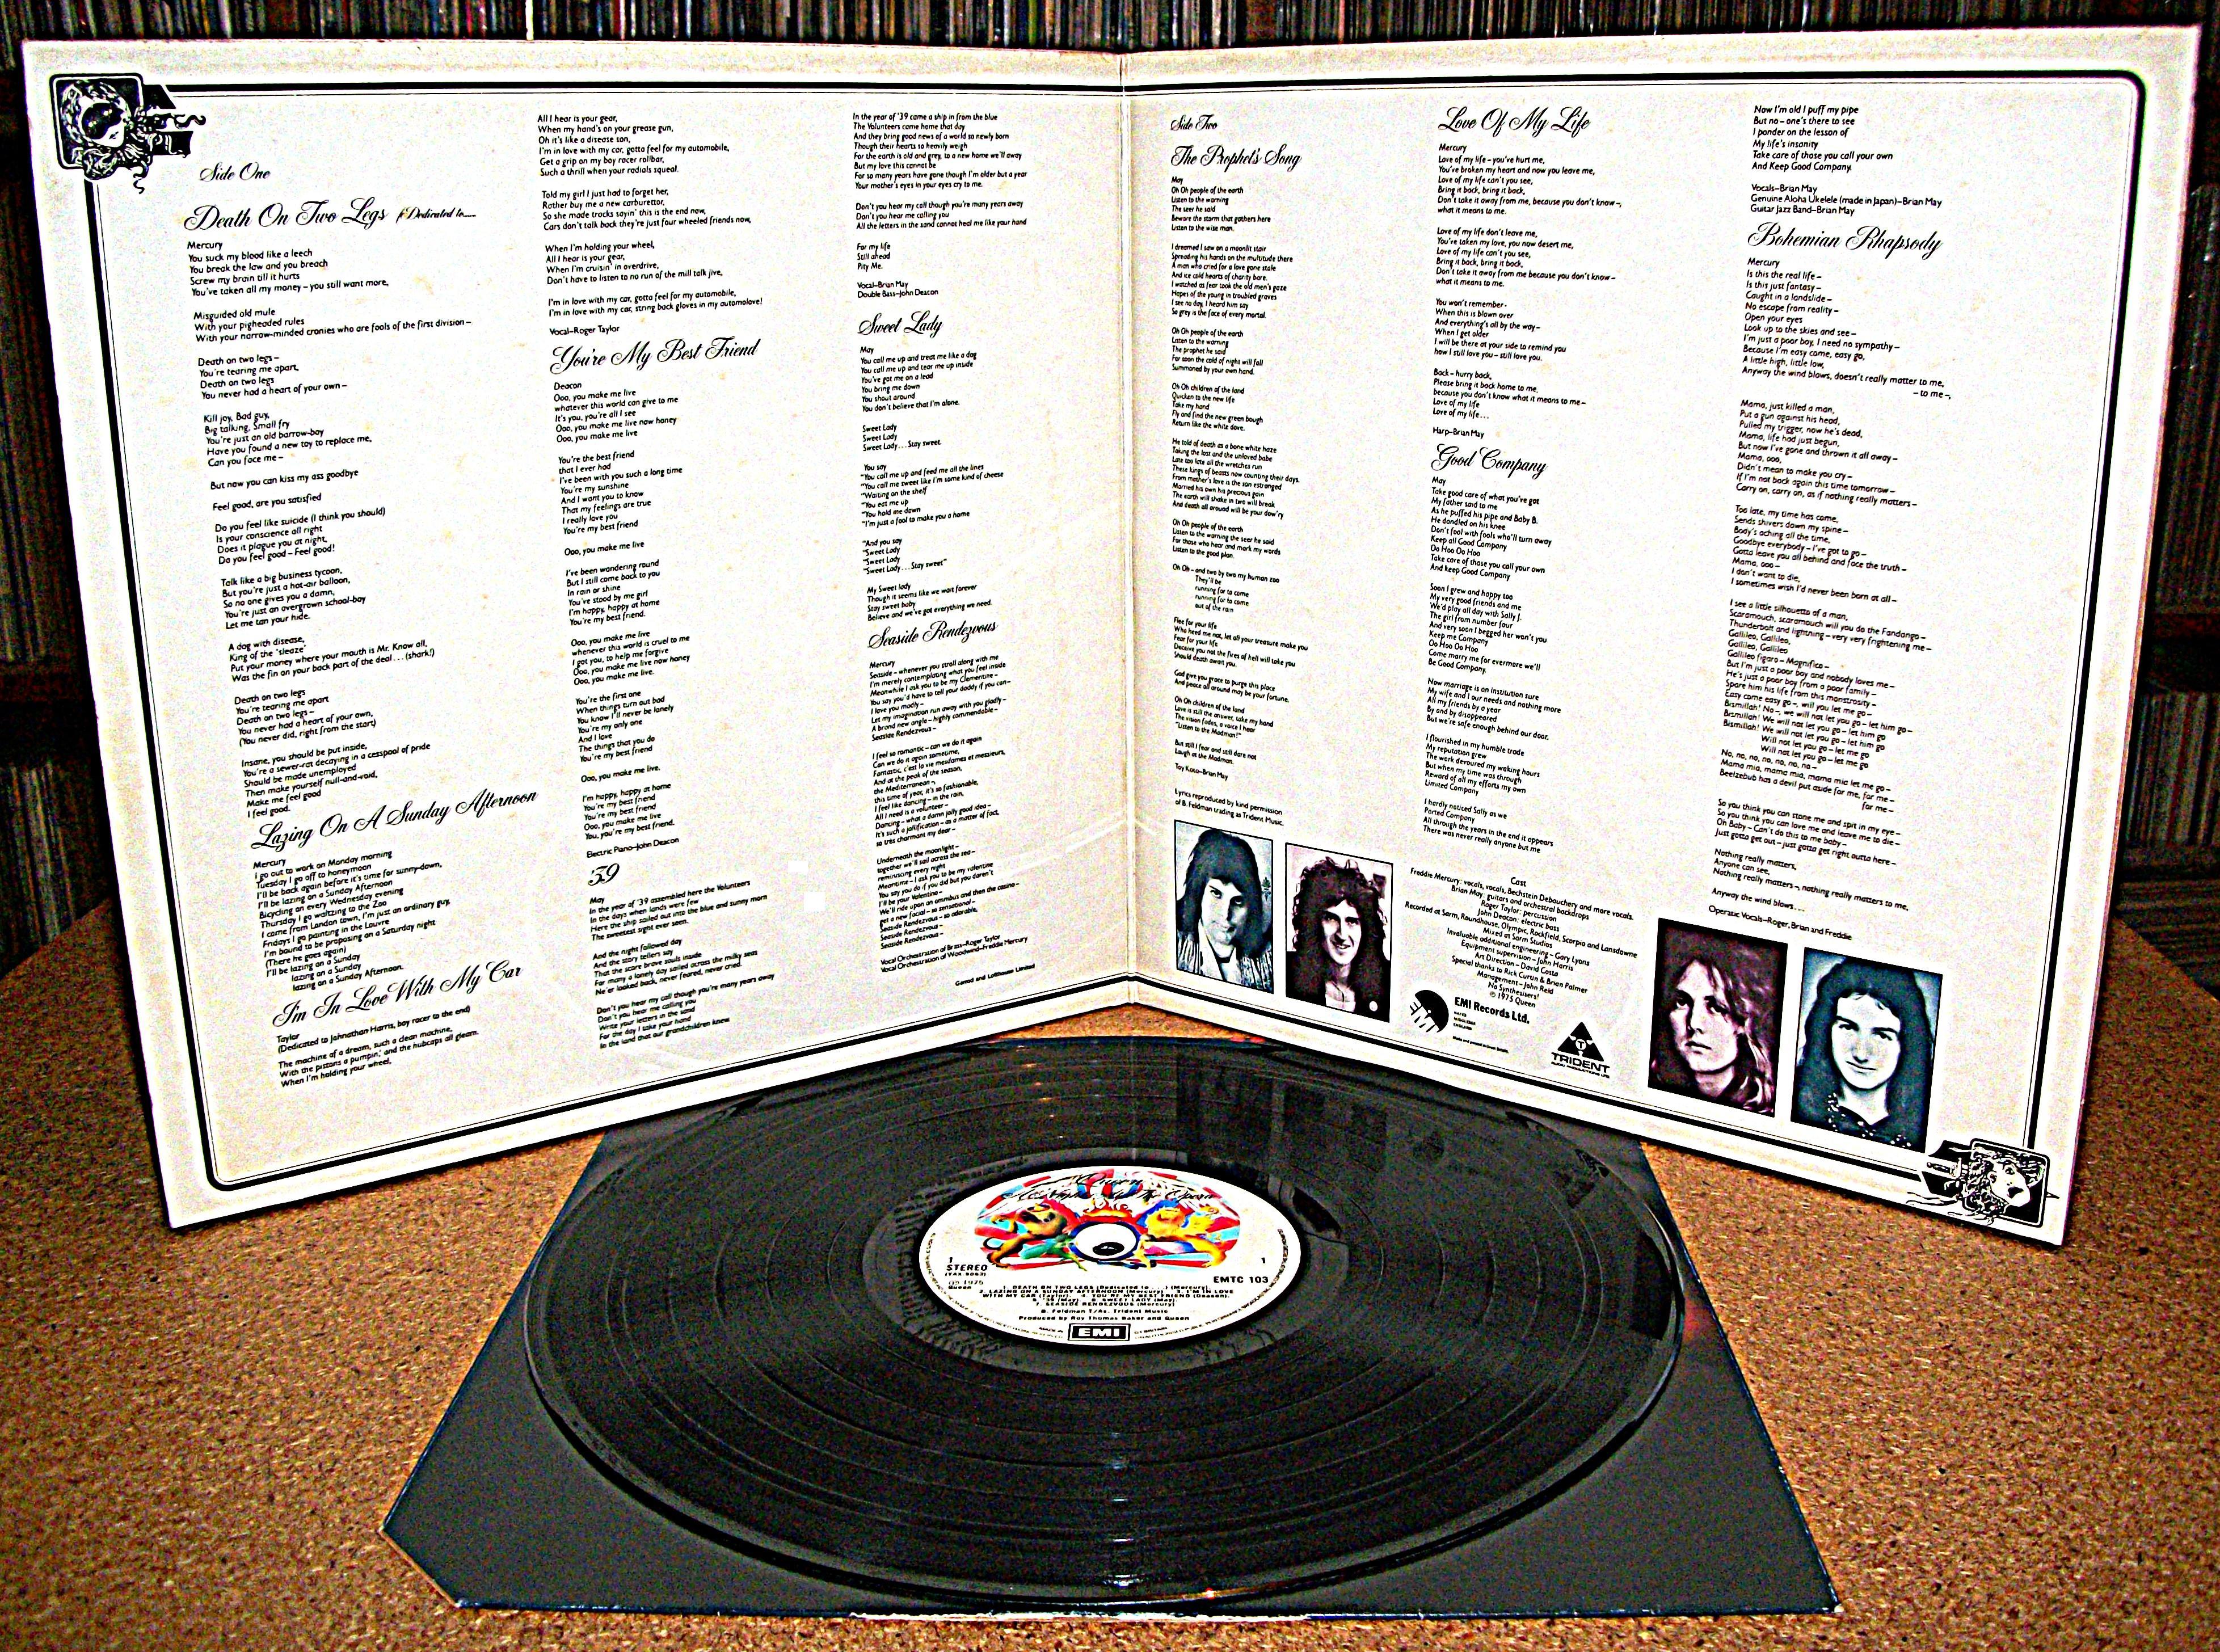 Queen - A Night at the Opera 1975 FLAC - Internet Archive